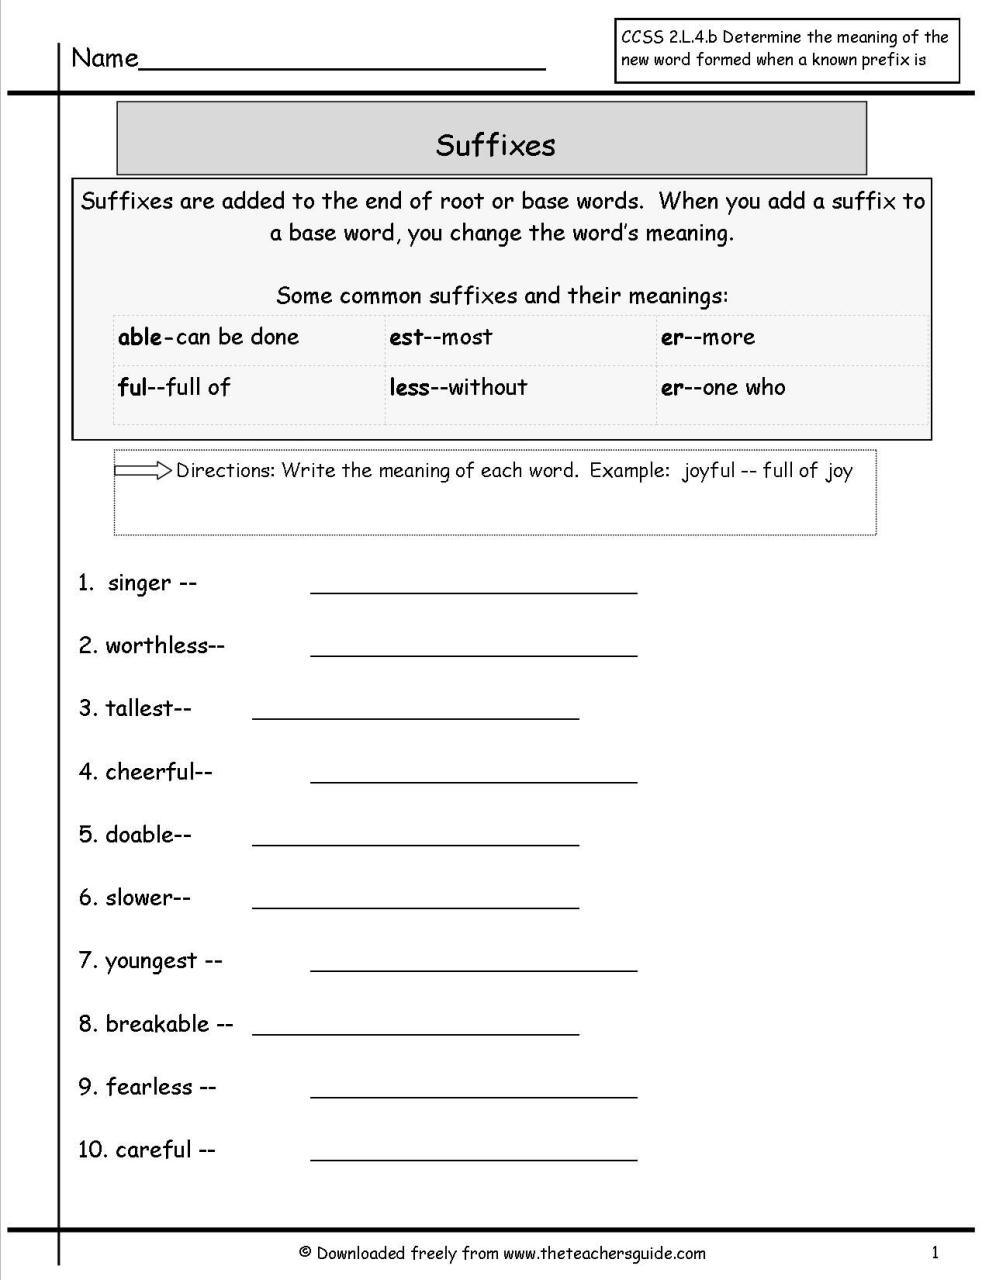 Suffixes Worksheets For Grade 4